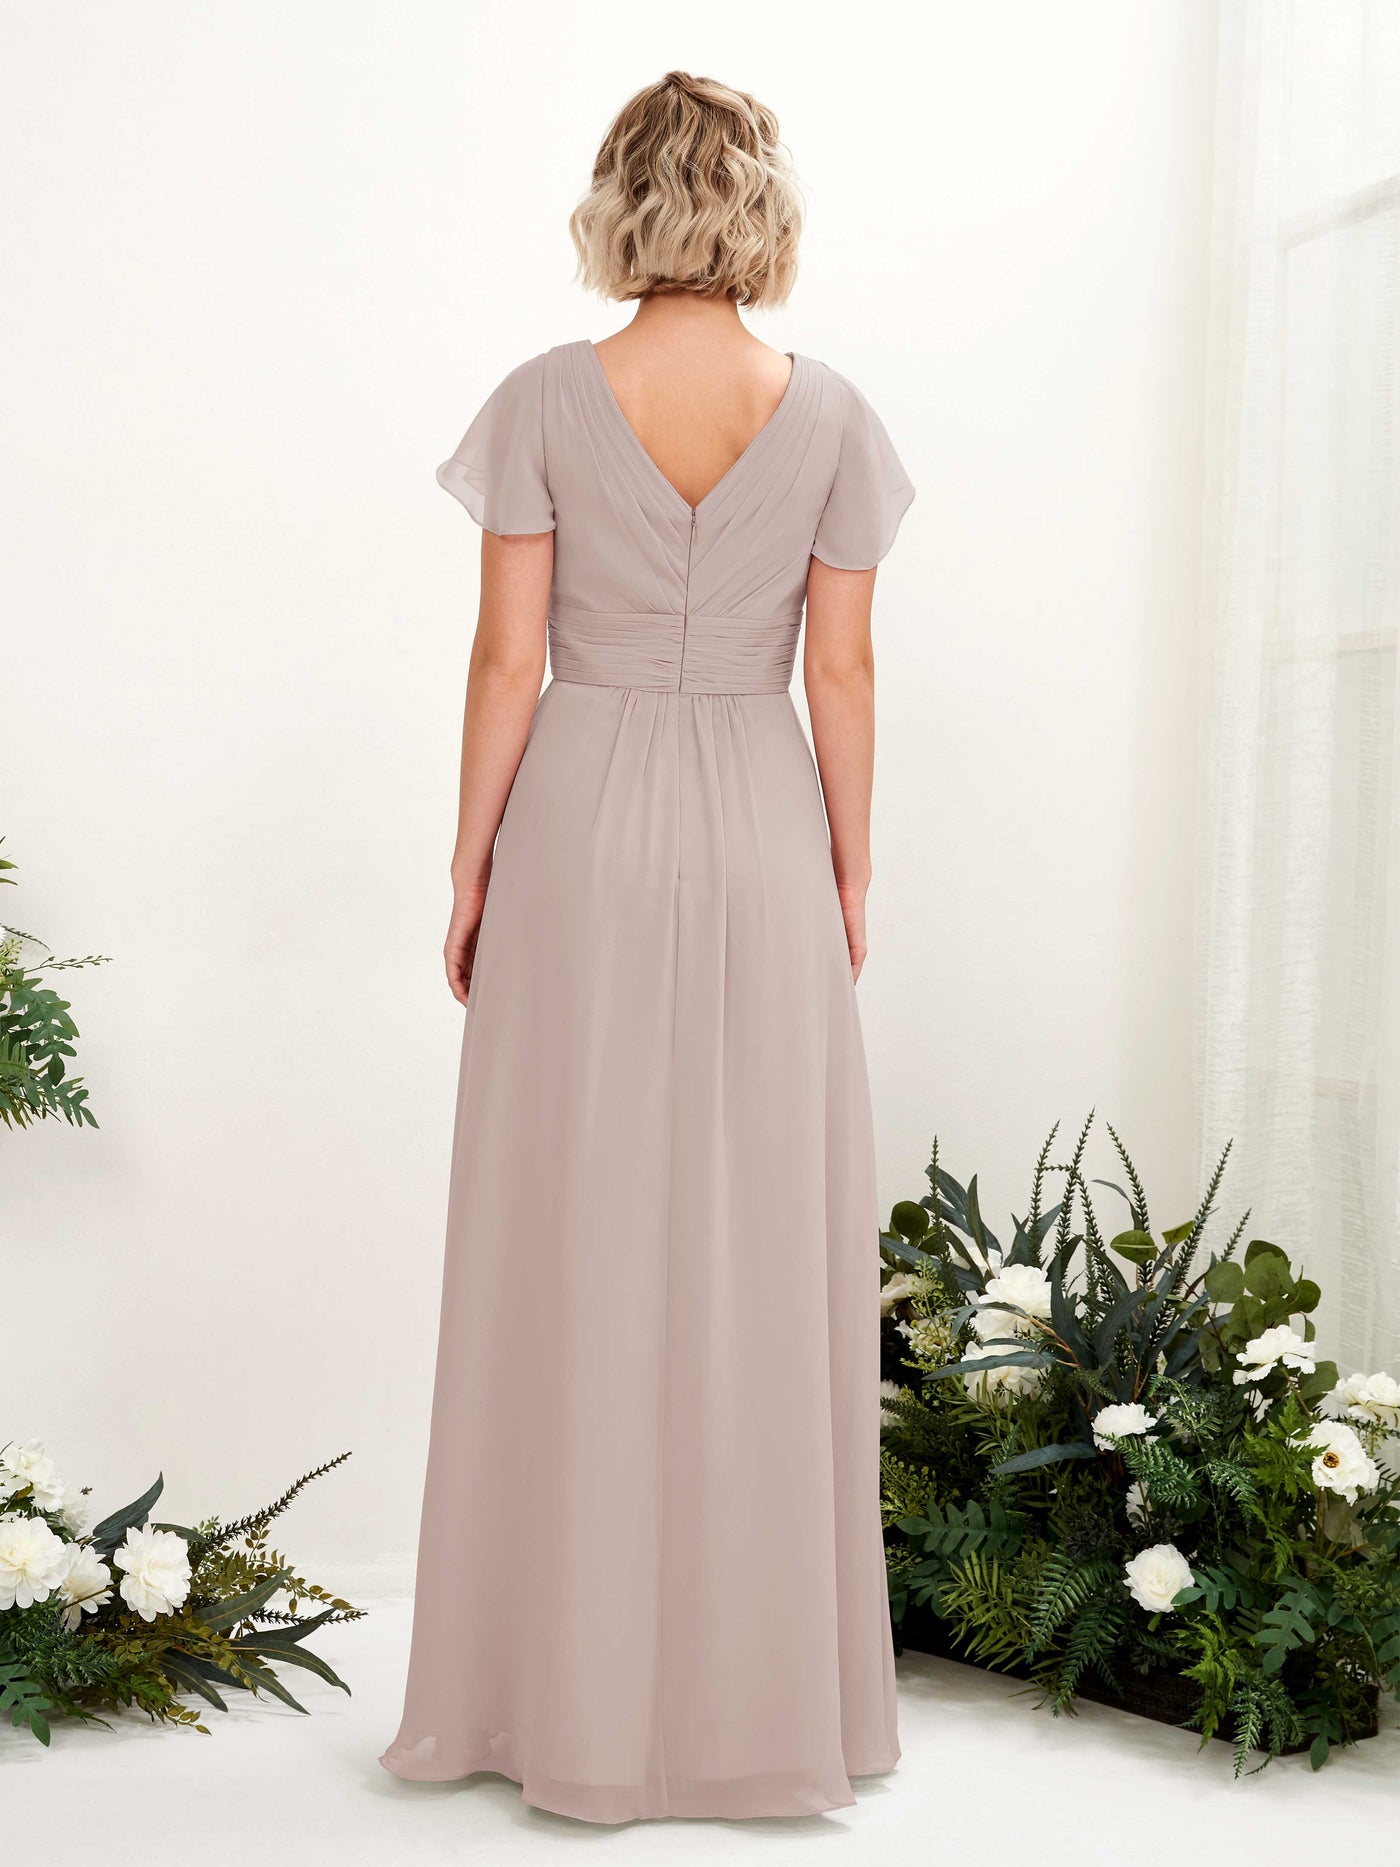 Taupe Bridesmaid Dresses Bridesmaid Dress A-line Chiffon V-neck Full Length Short Sleeves Wedding Party Dress (81224324)#color_taupe